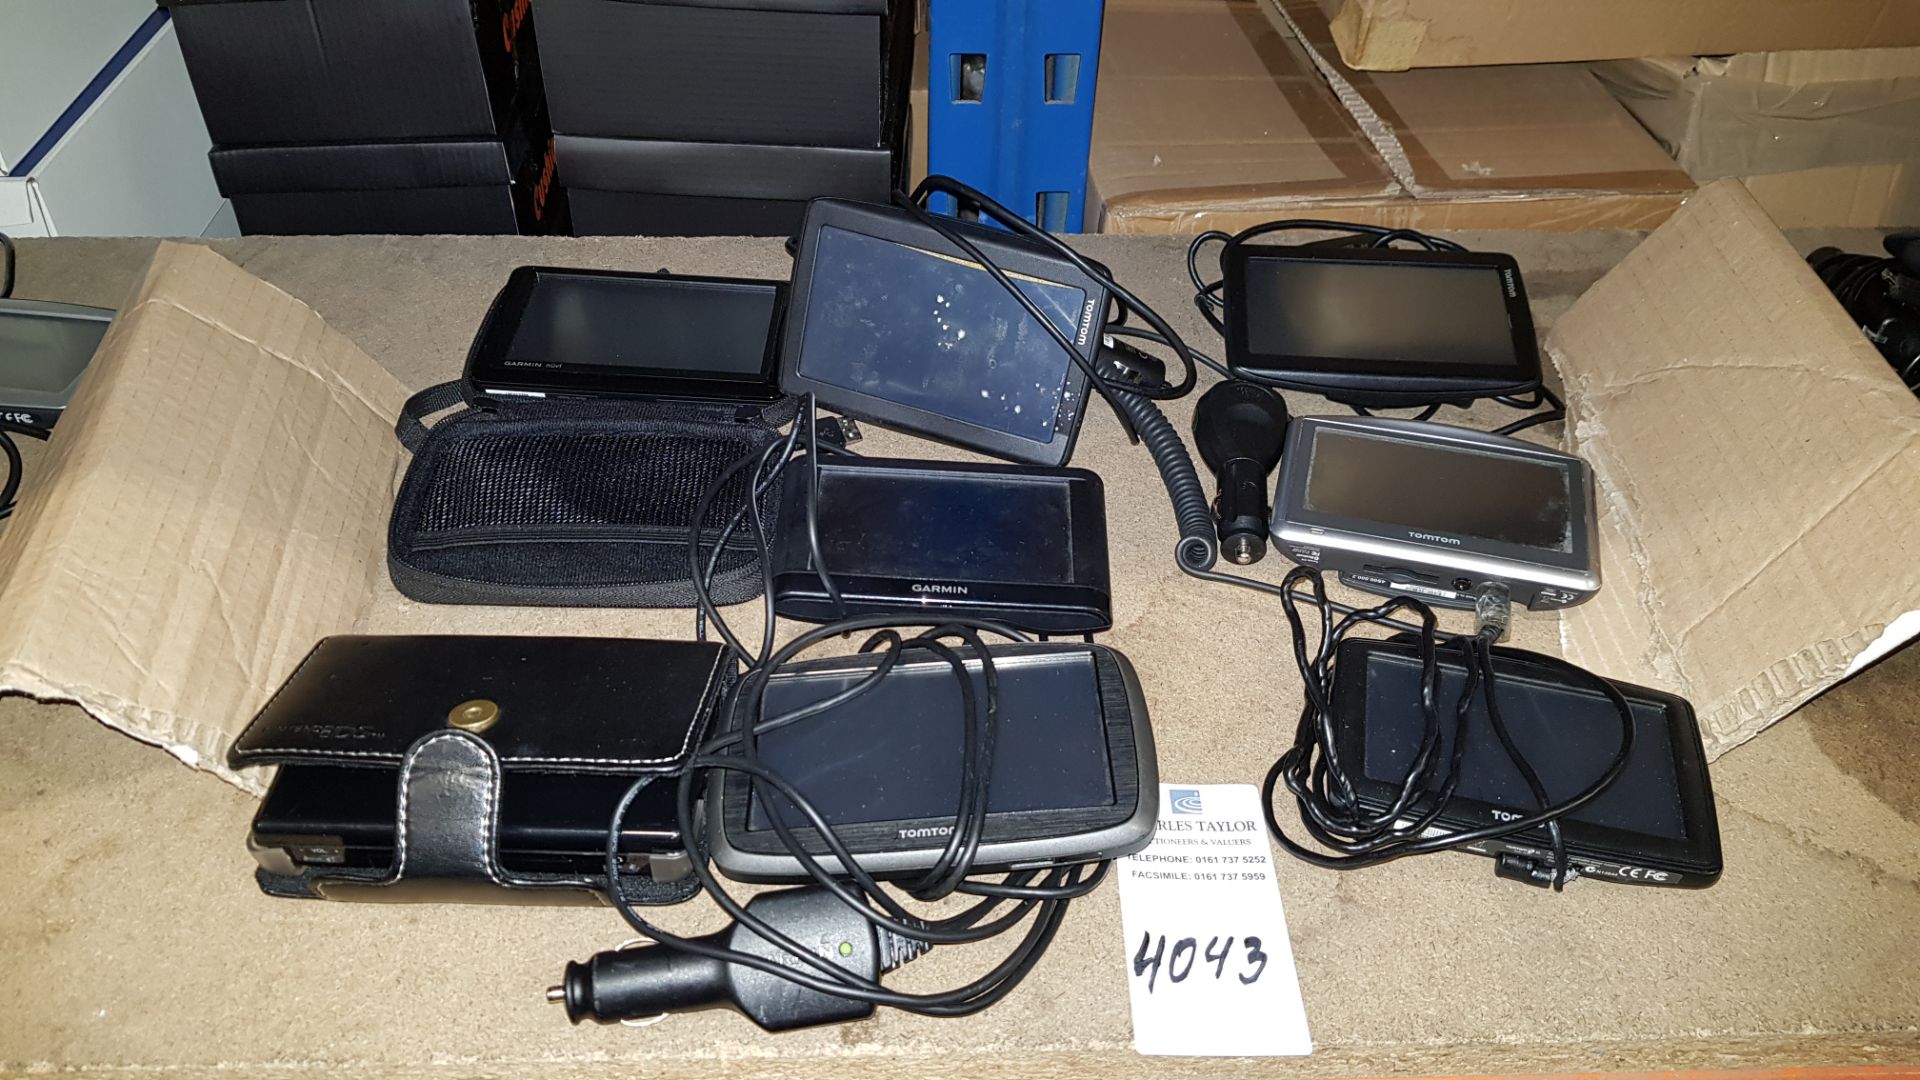 8 PIECE ASSORTED LOT CONTAINING 5 X TOMTOM SAT NAVS, 2 X GARMIN SAT NAVS AND 1 X NINTENDO DS